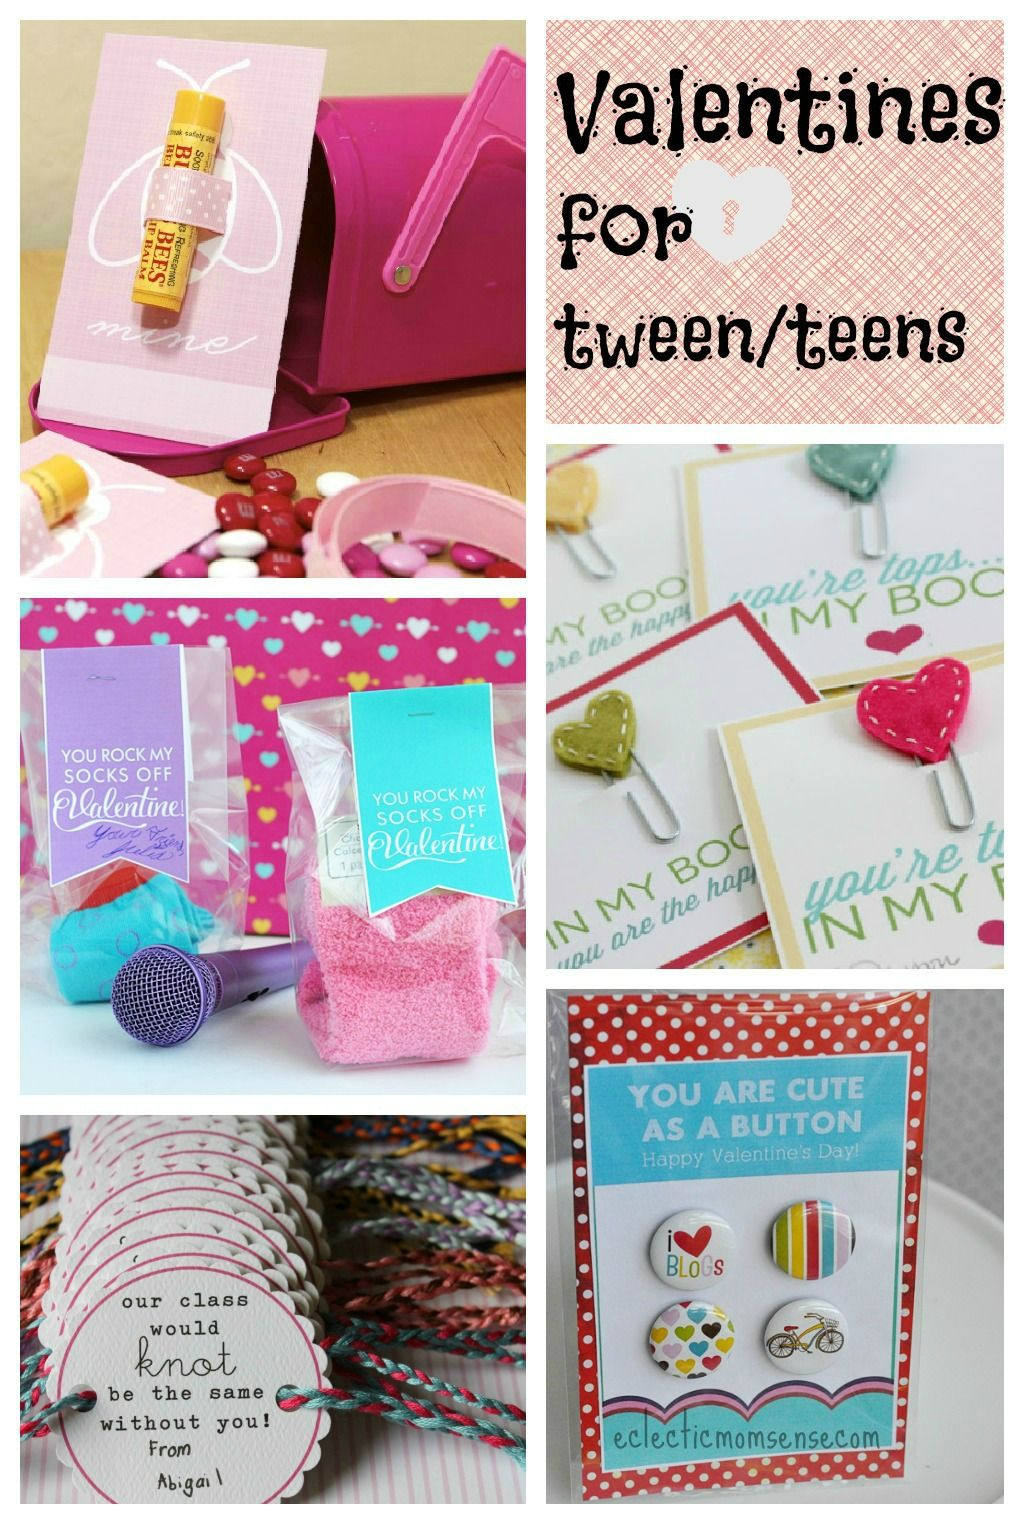 Valentines Gift Ideas For Teens
 50 Valentines Ideas A Roundup of Sweet Cards